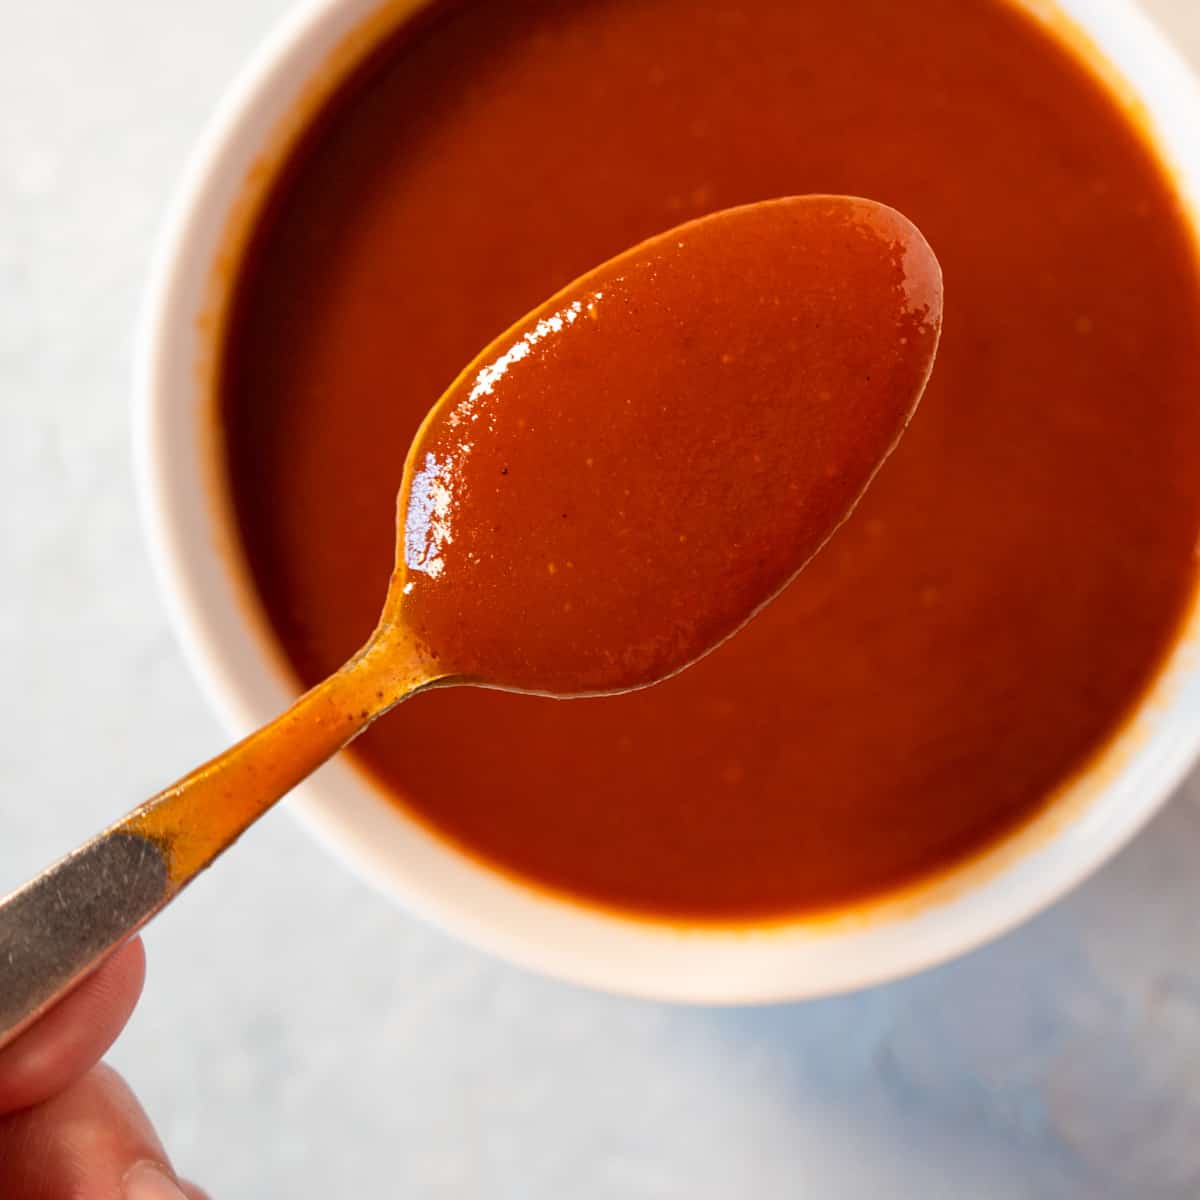 Prepared bbq sauce in a white bowl with a hand holding a spoonful to show how smooth it is.